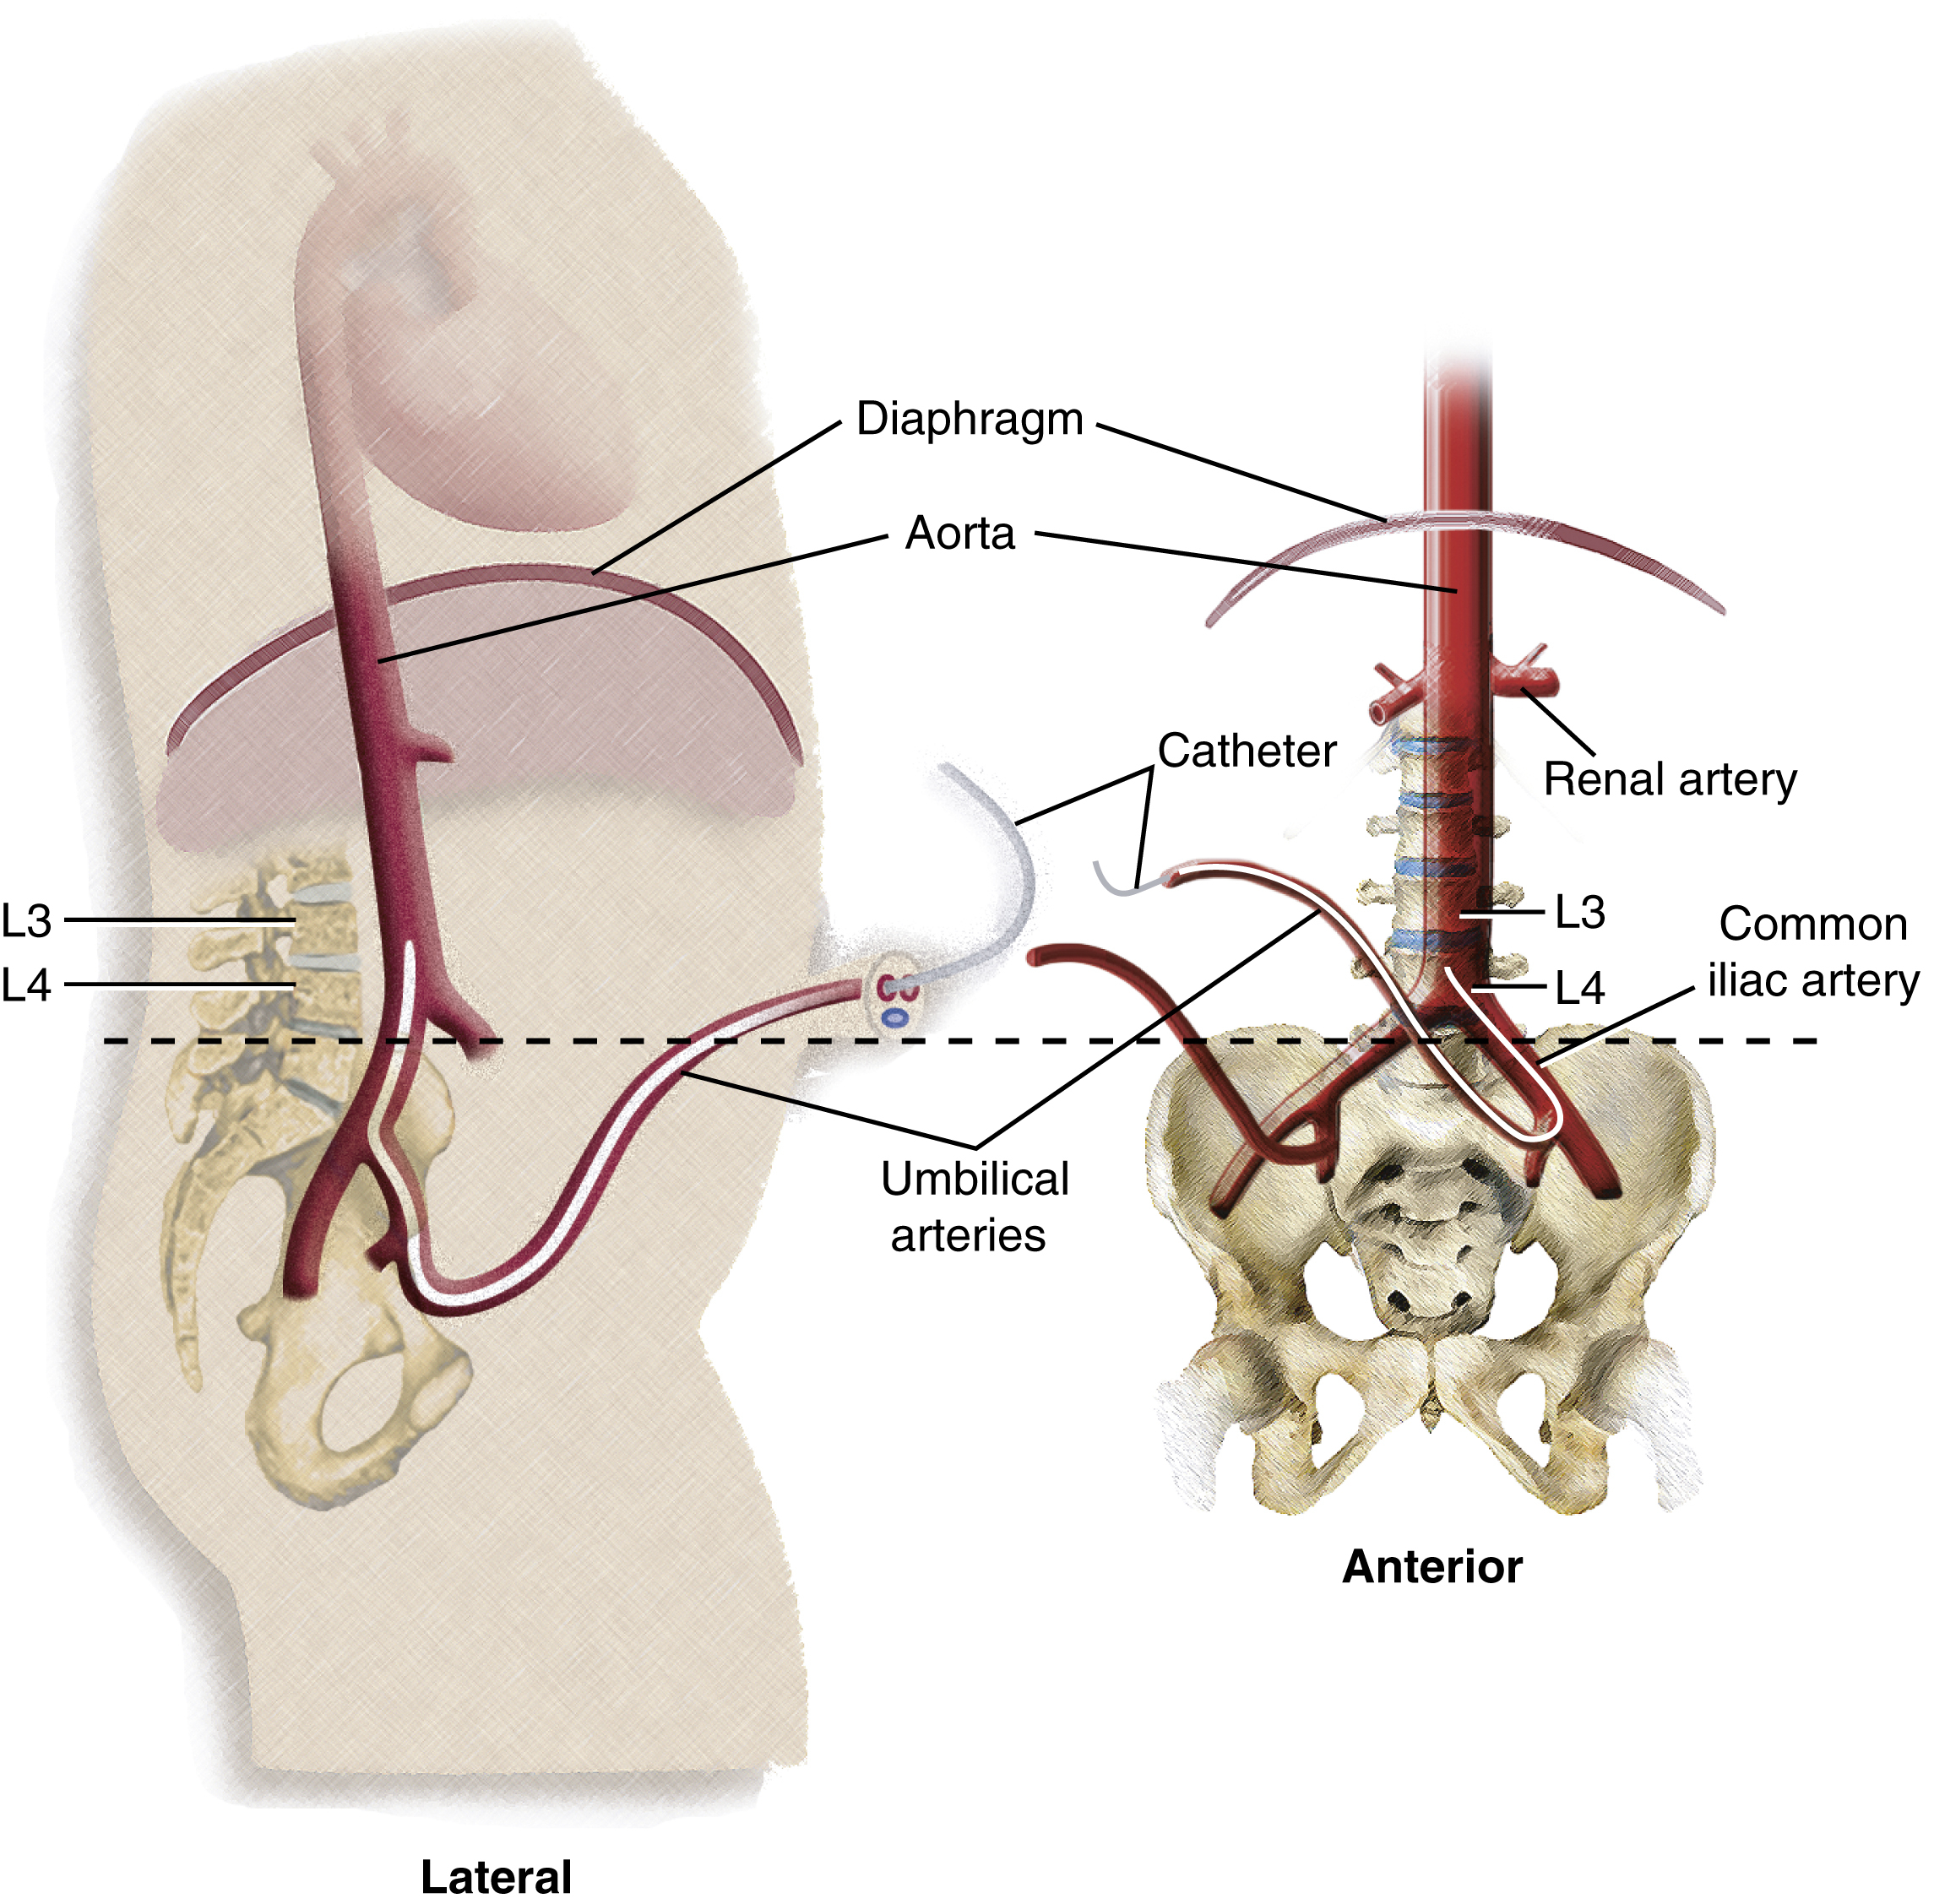 Fig. 42.2, Lateral and anterior location of abdominal aortic bifurcation with reference to L3 and visualization of umbilical arteries and common iliac arteries.